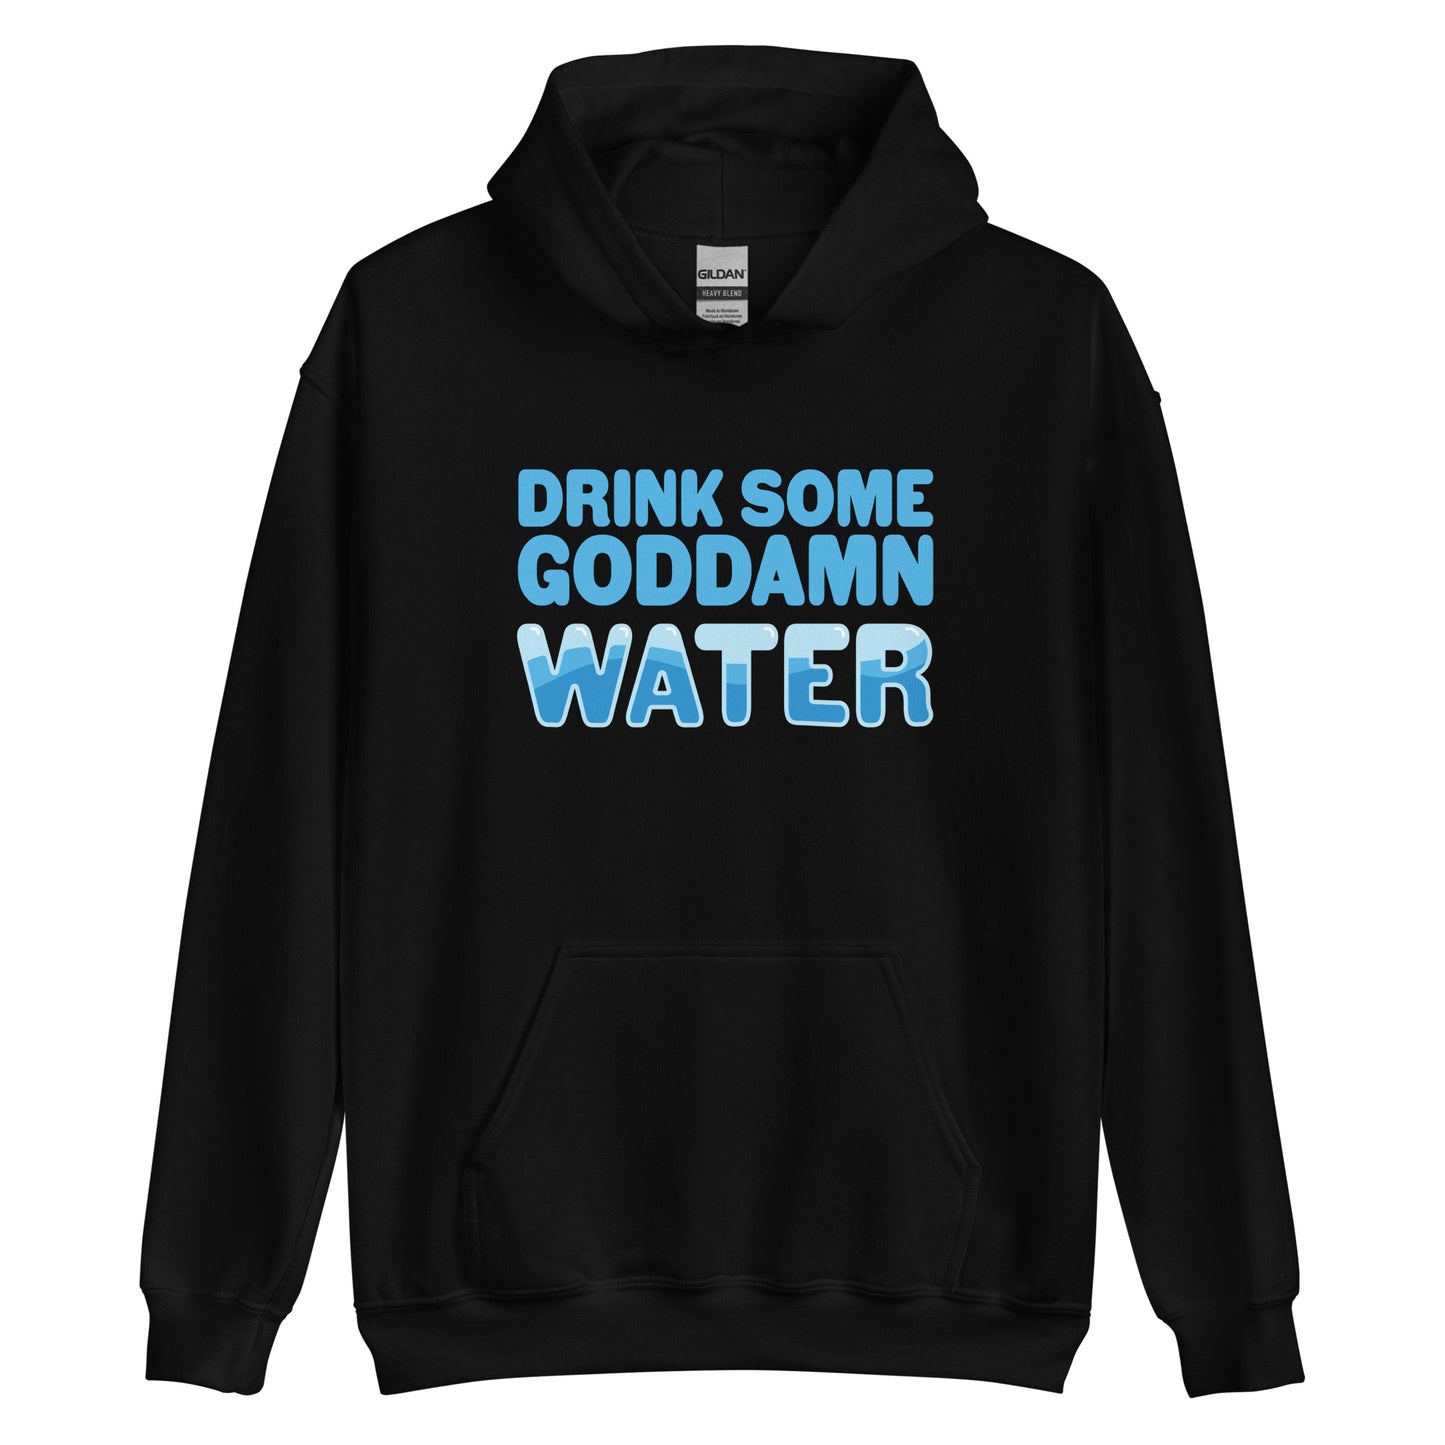 A black hooded sweatshirt with bold blue text reading "Drink some goddamn water"